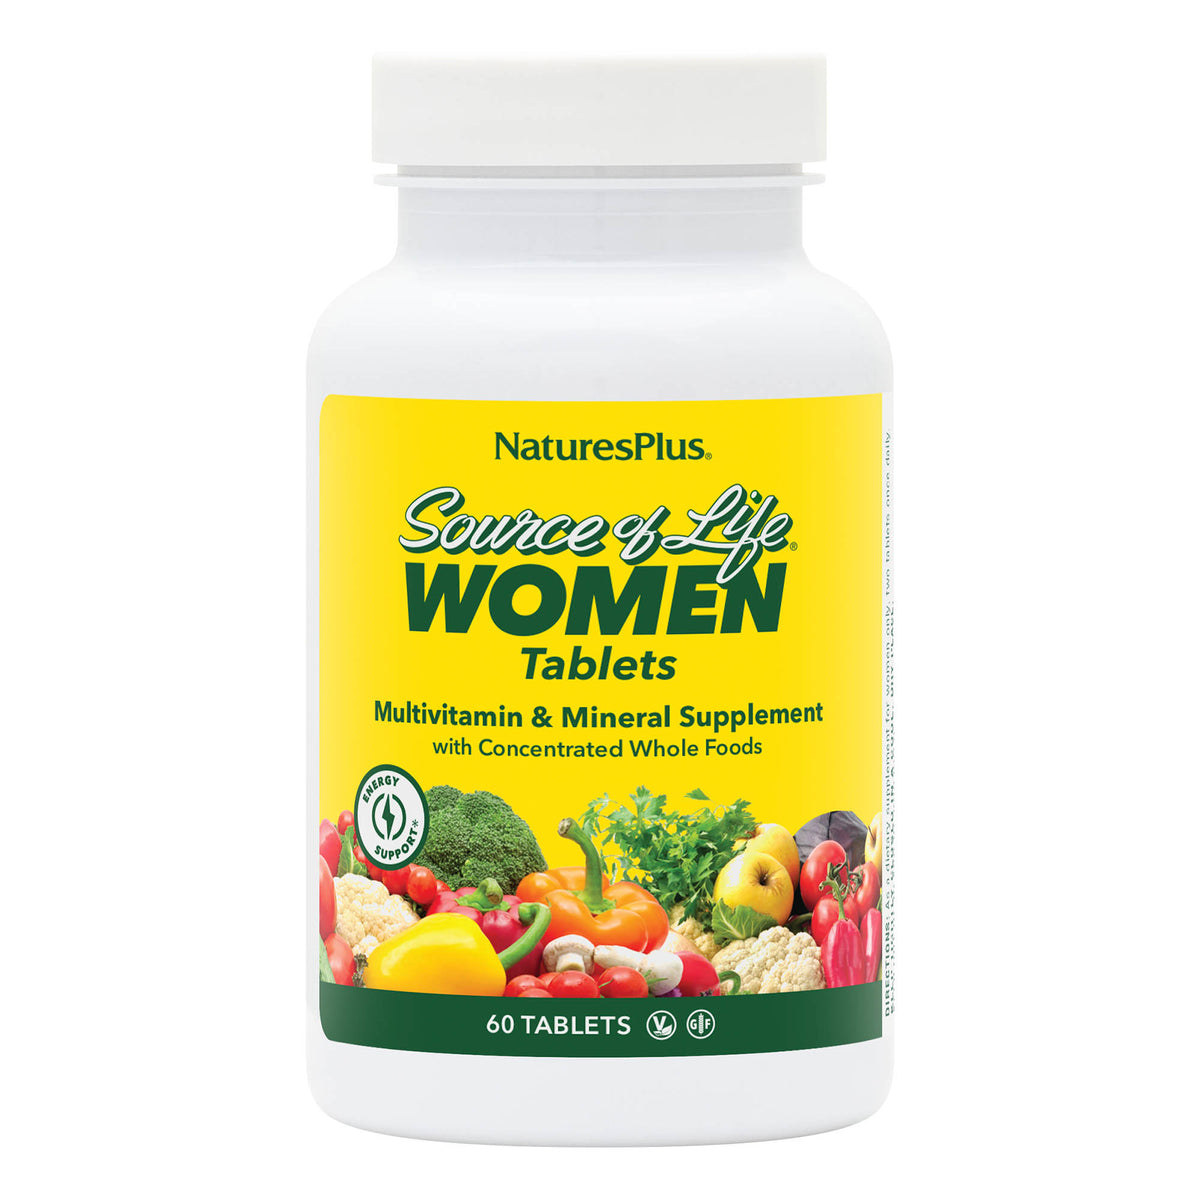 product image of Source of Life® Women Multivitamin Tablets containing 60 Count